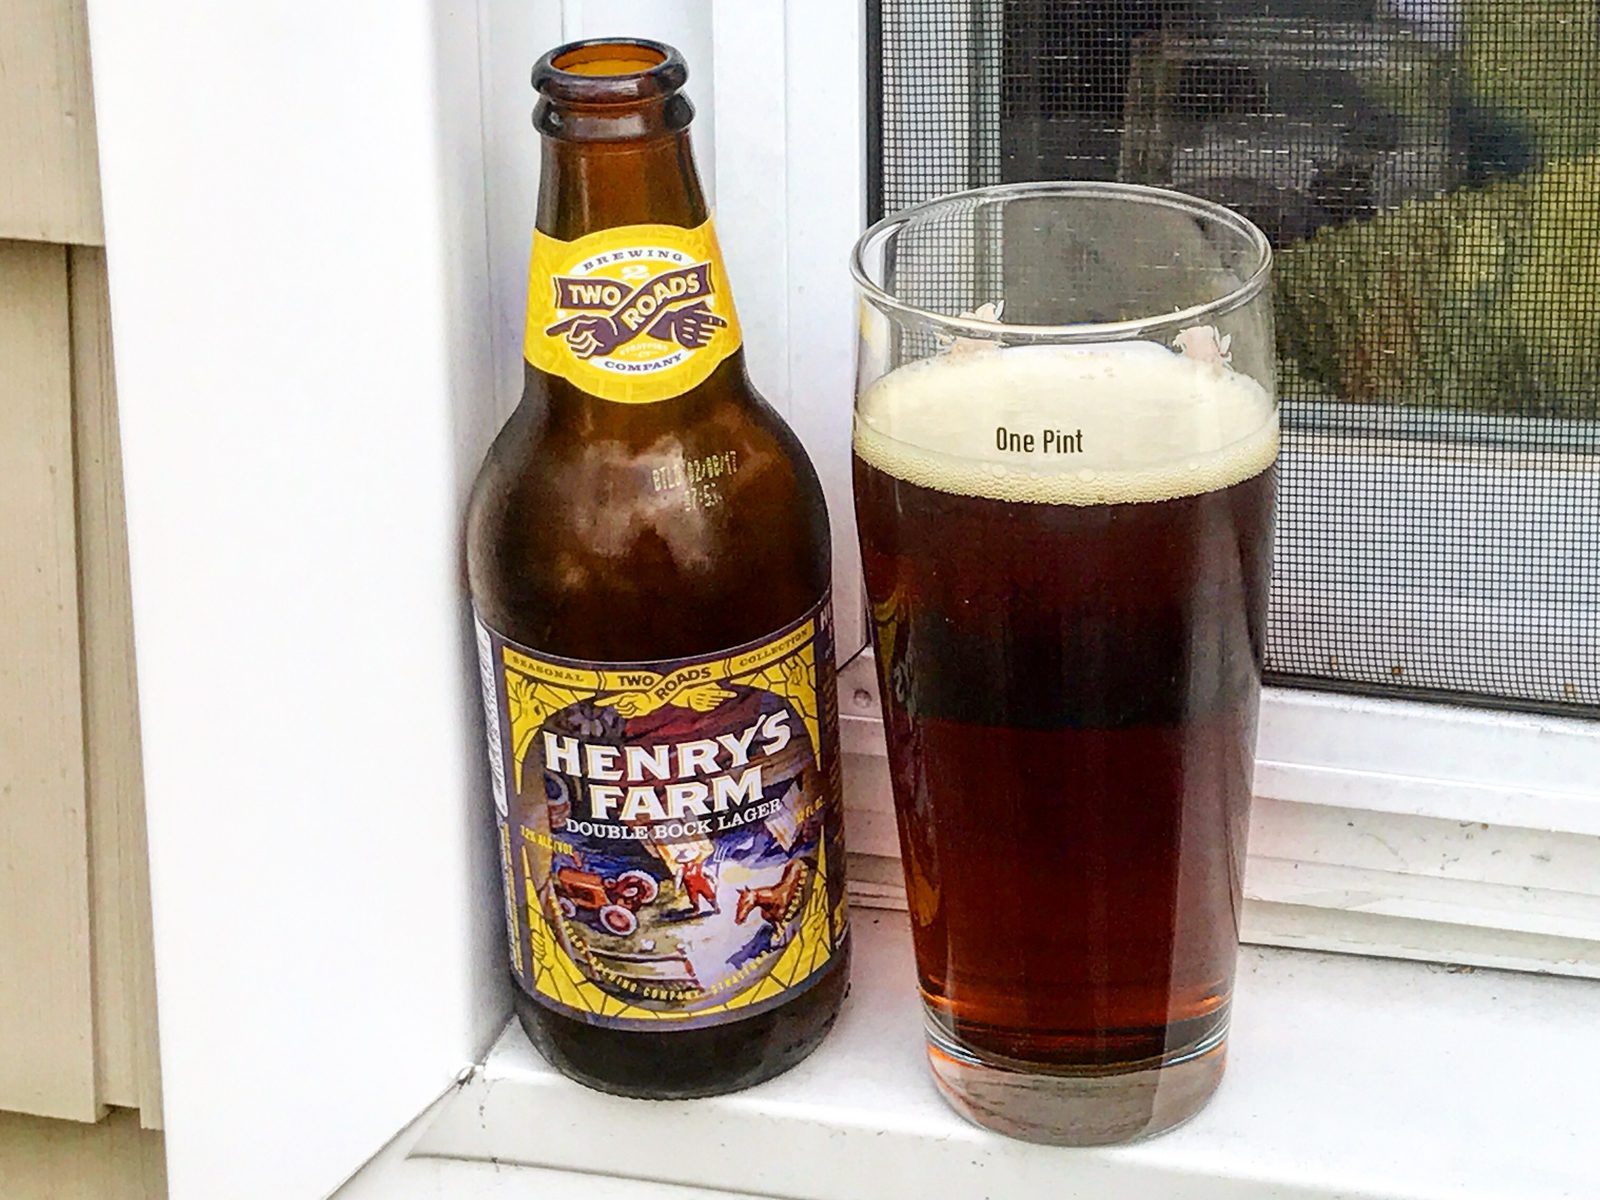 Two Roads Brewing Company: Henry's Farm